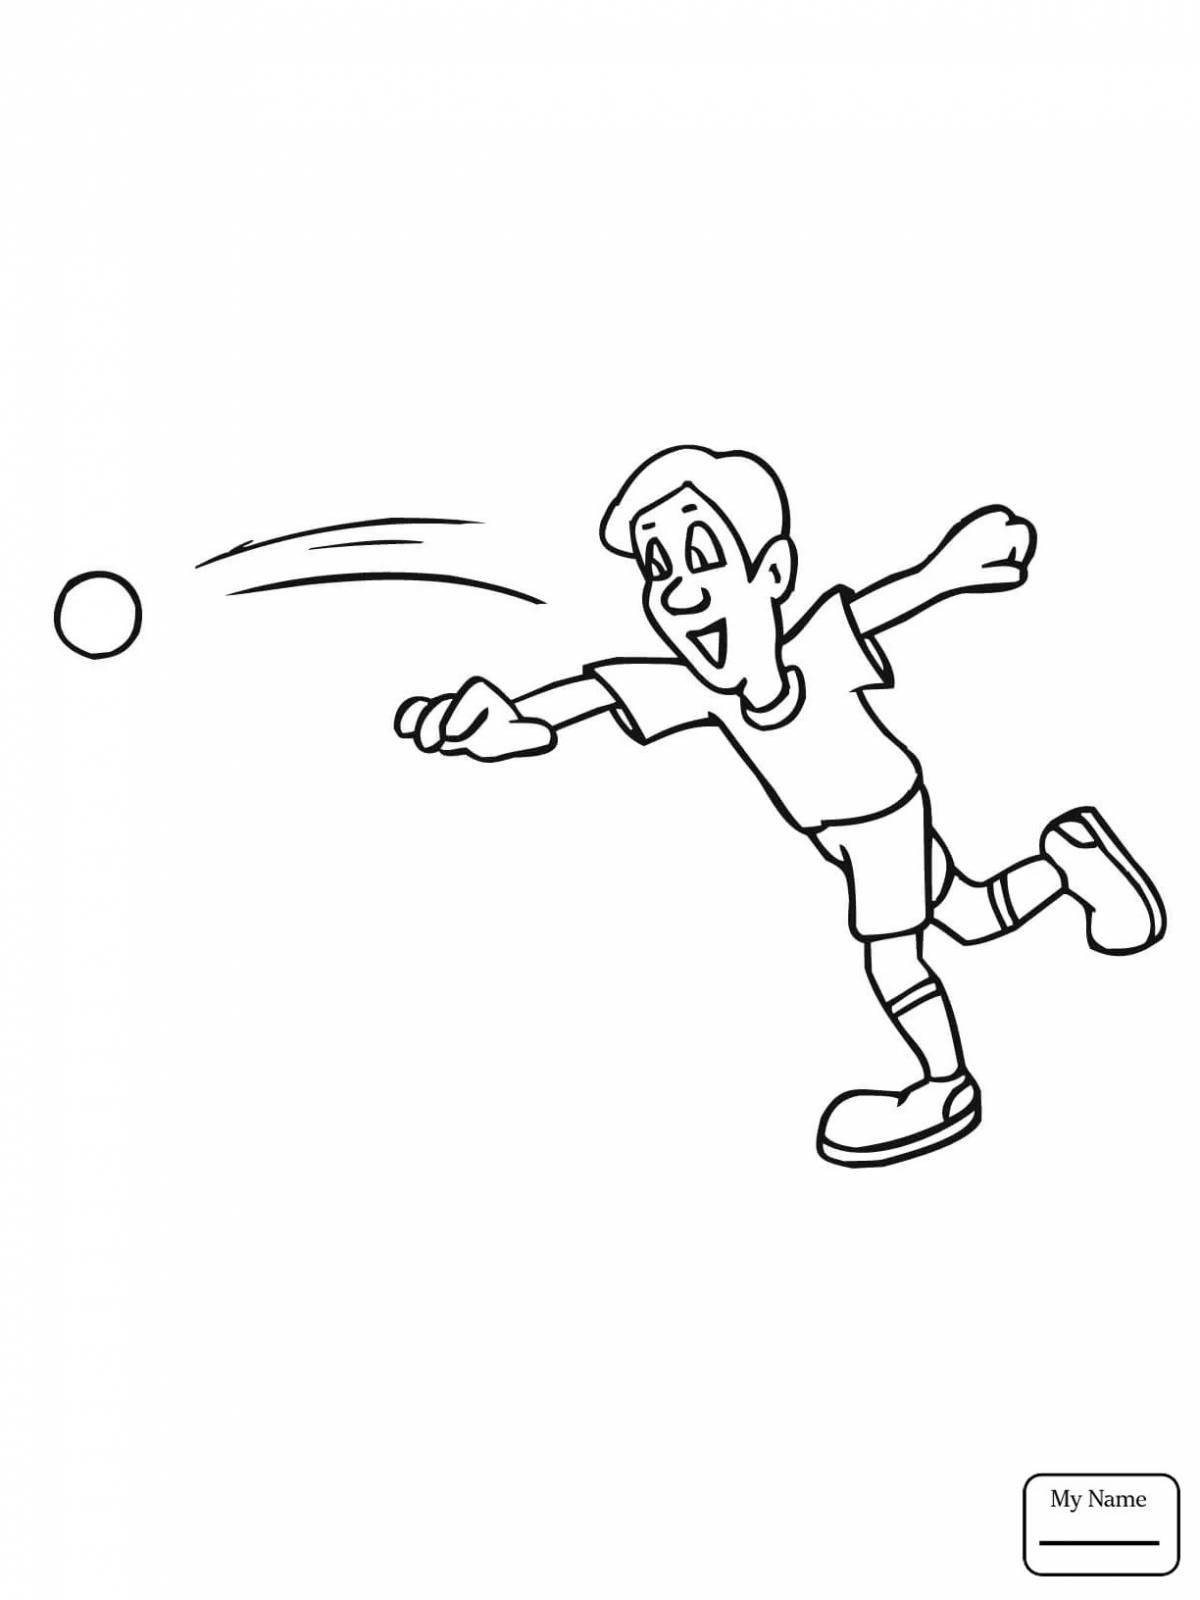 Animated athletics coloring page